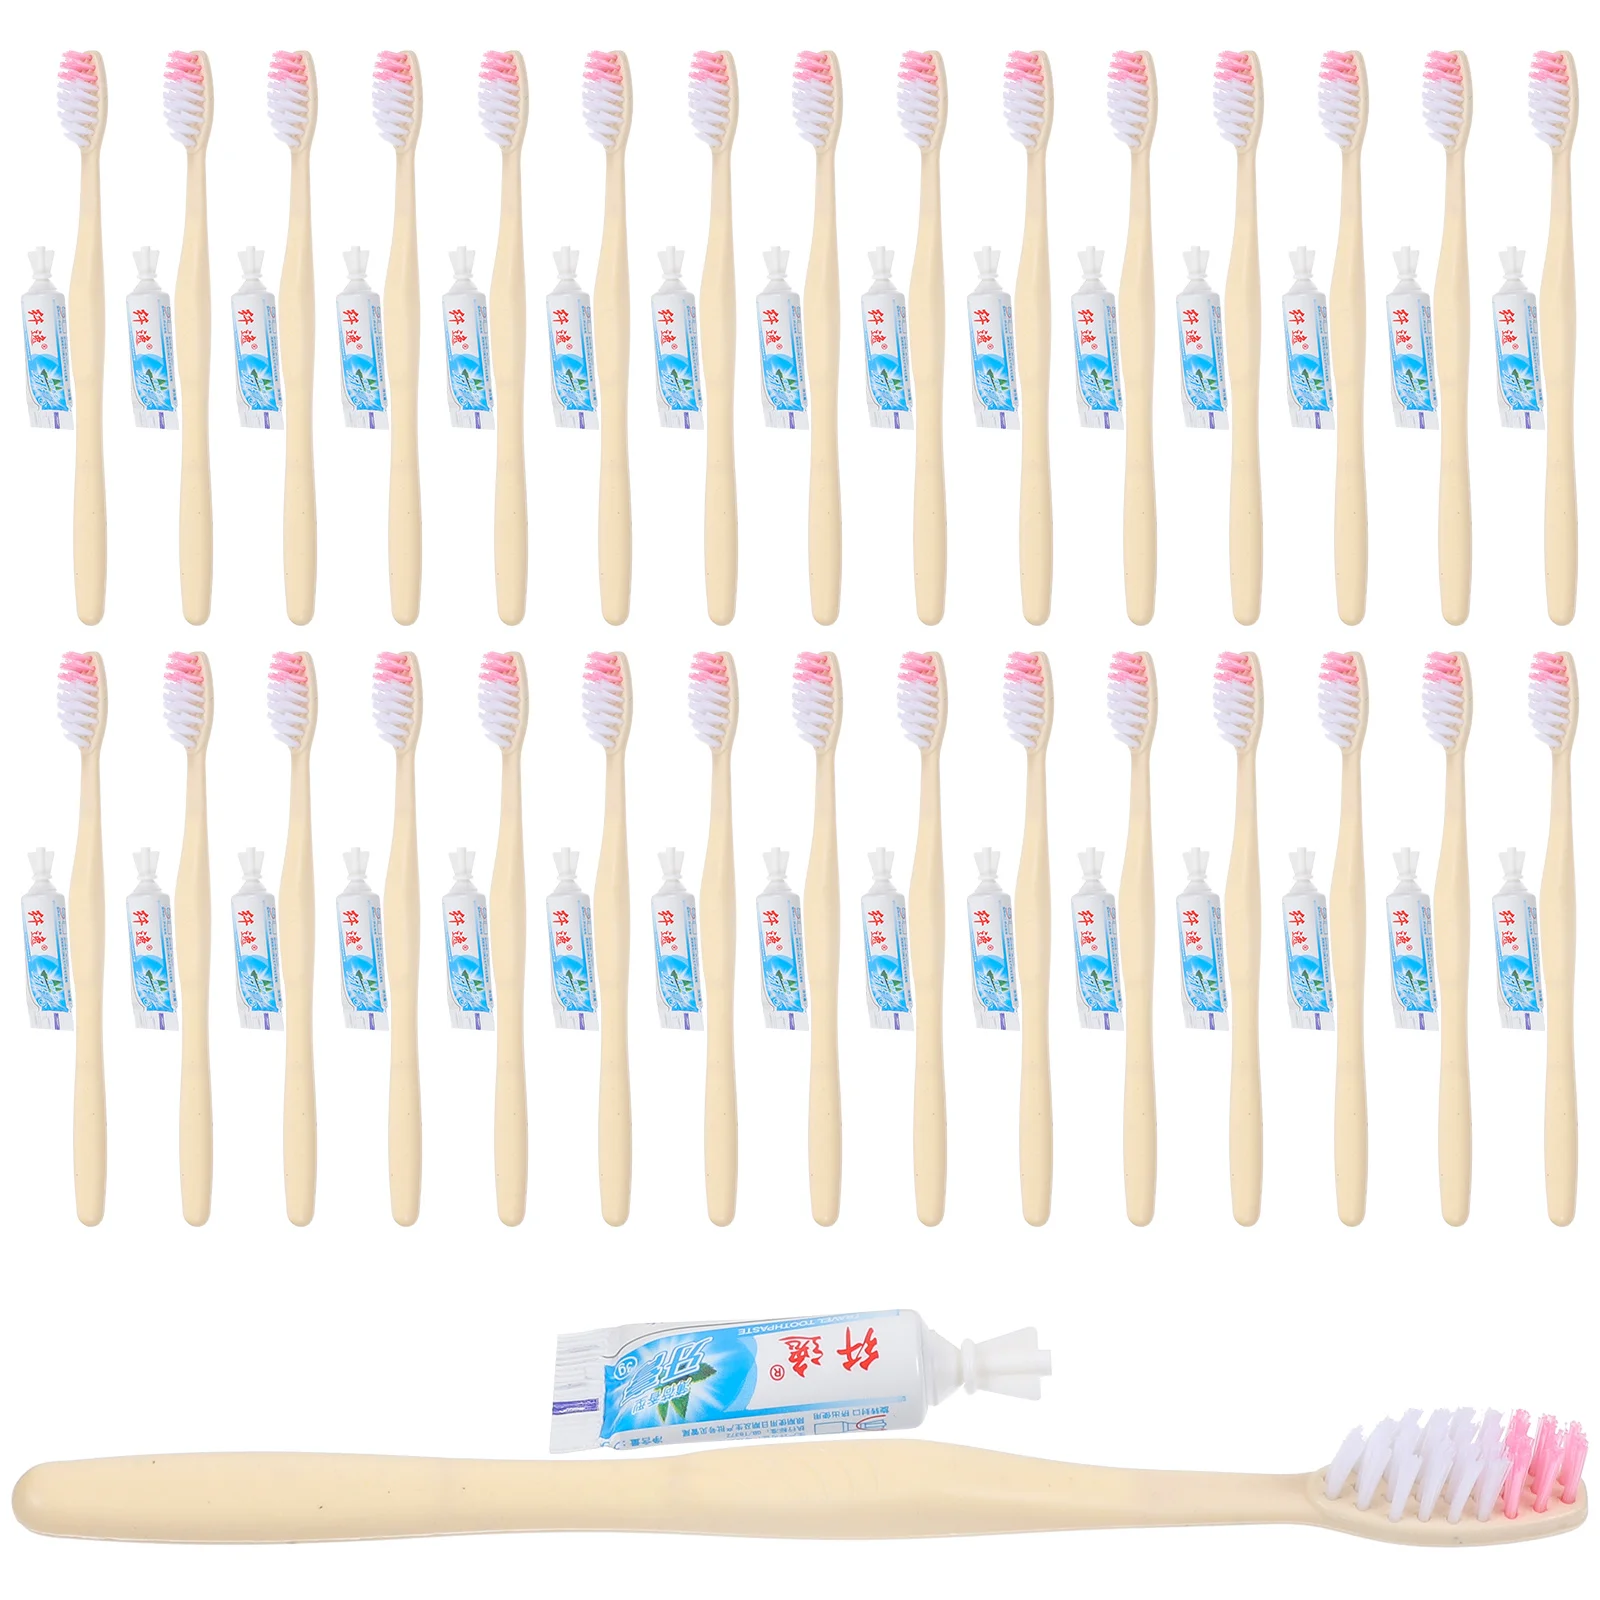 

100Pcs Toothbrushes with Toothpaste Individually Disposable Travel Toothbrush